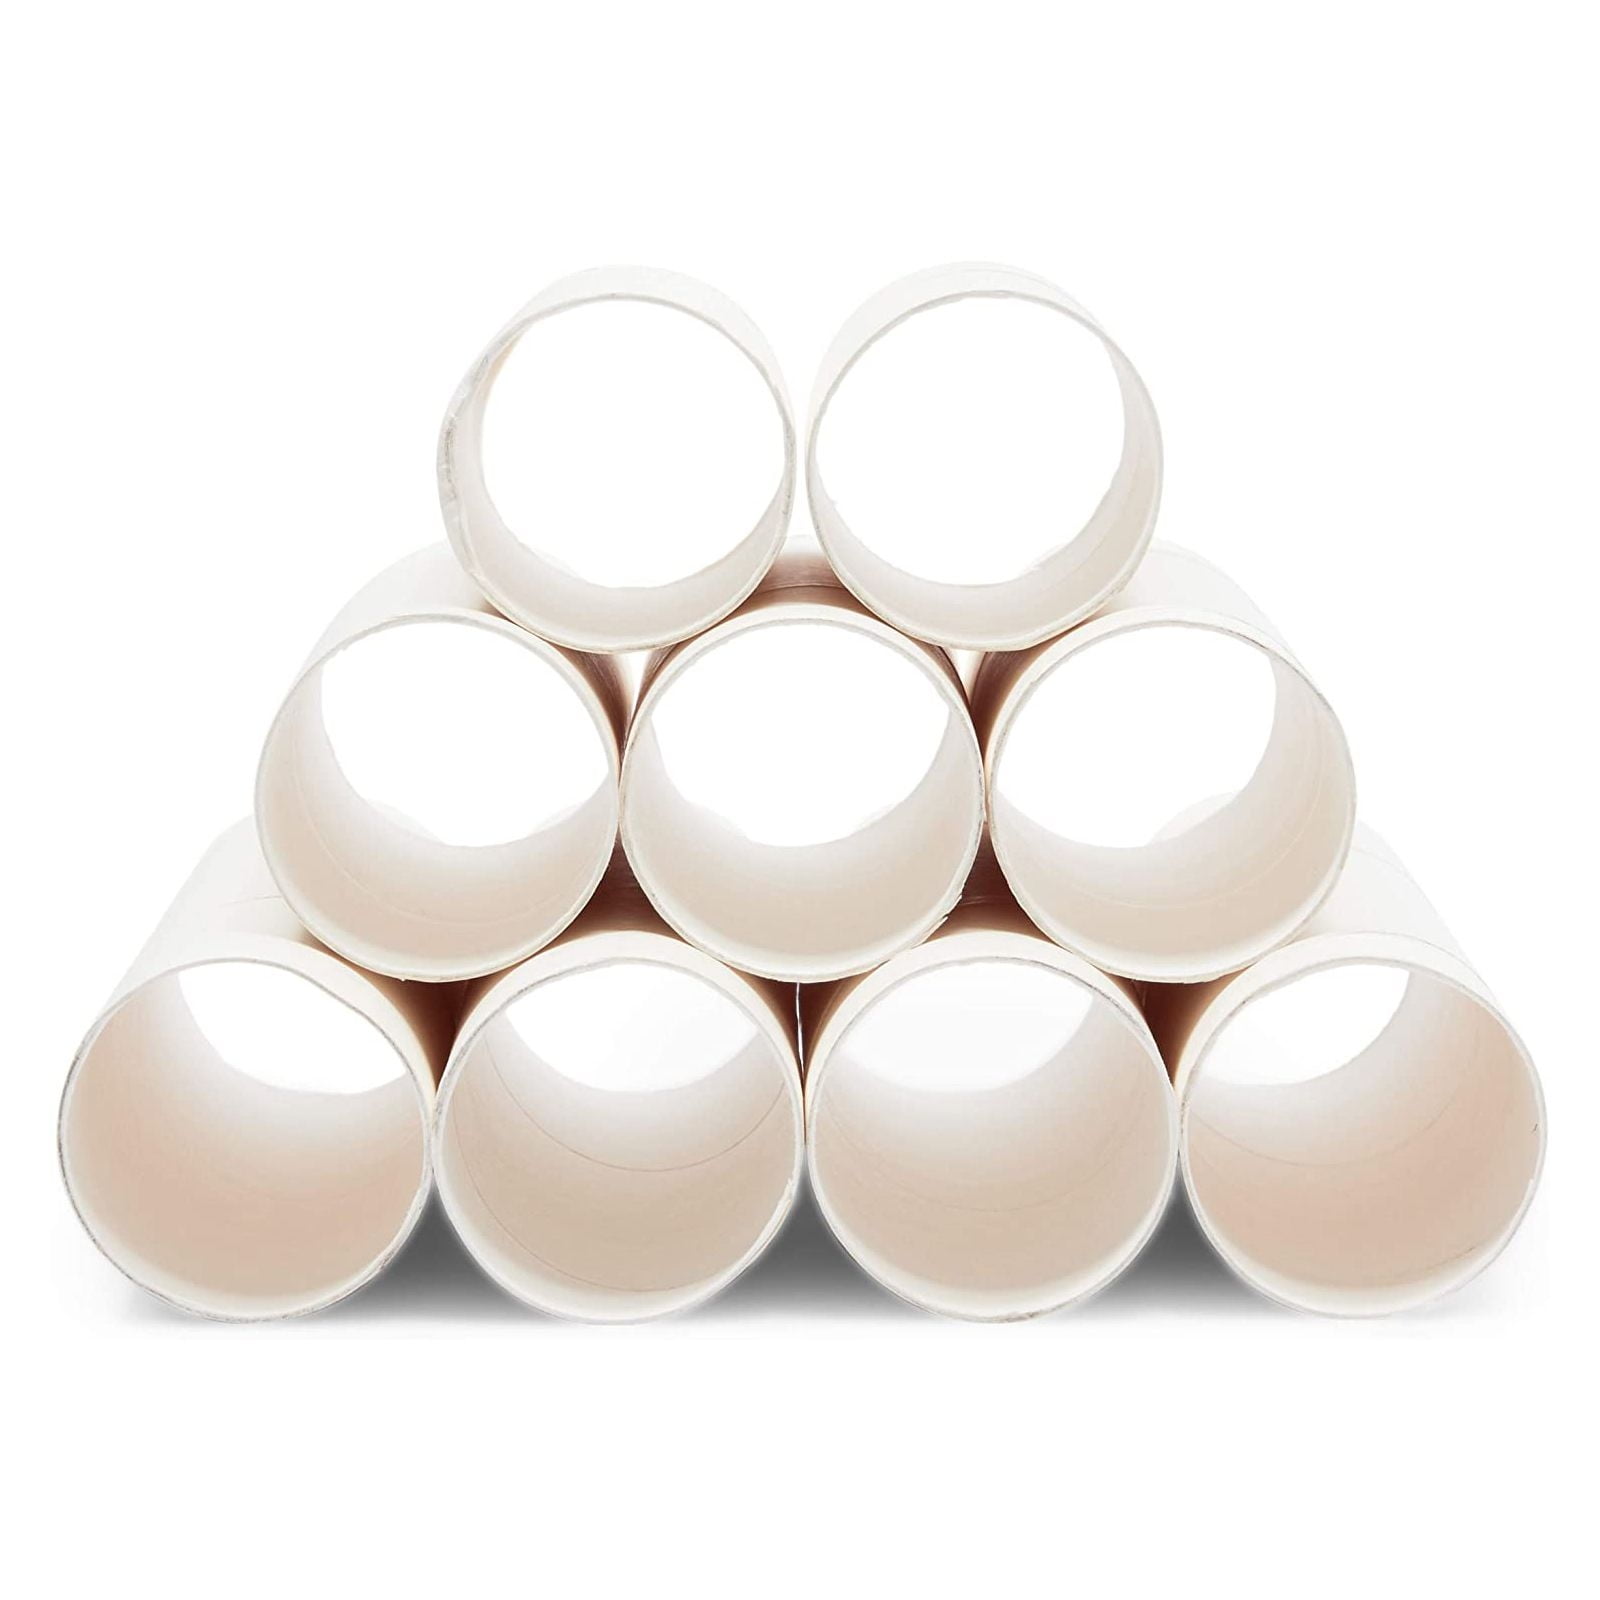 Genie Crafts 48 Pack Cardboard Tubes, Empty White Toilet Paper Rolls For  Crafts, Classroom, Diy Projects (1.6 X 4 In) : Target